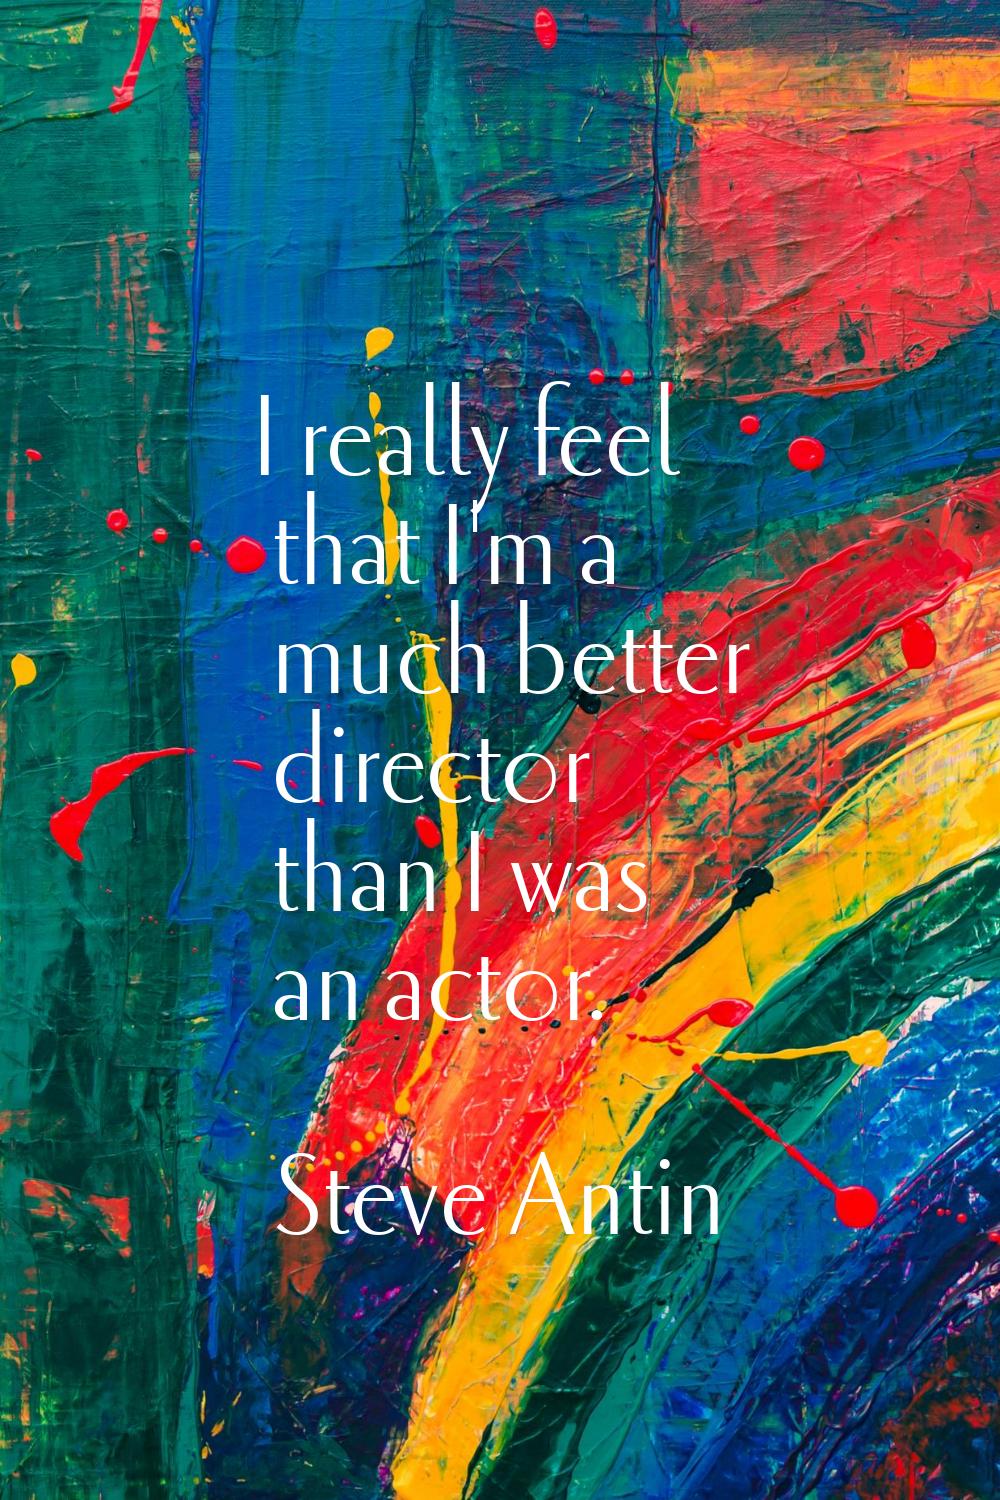 I really feel that I'm a much better director than I was an actor.